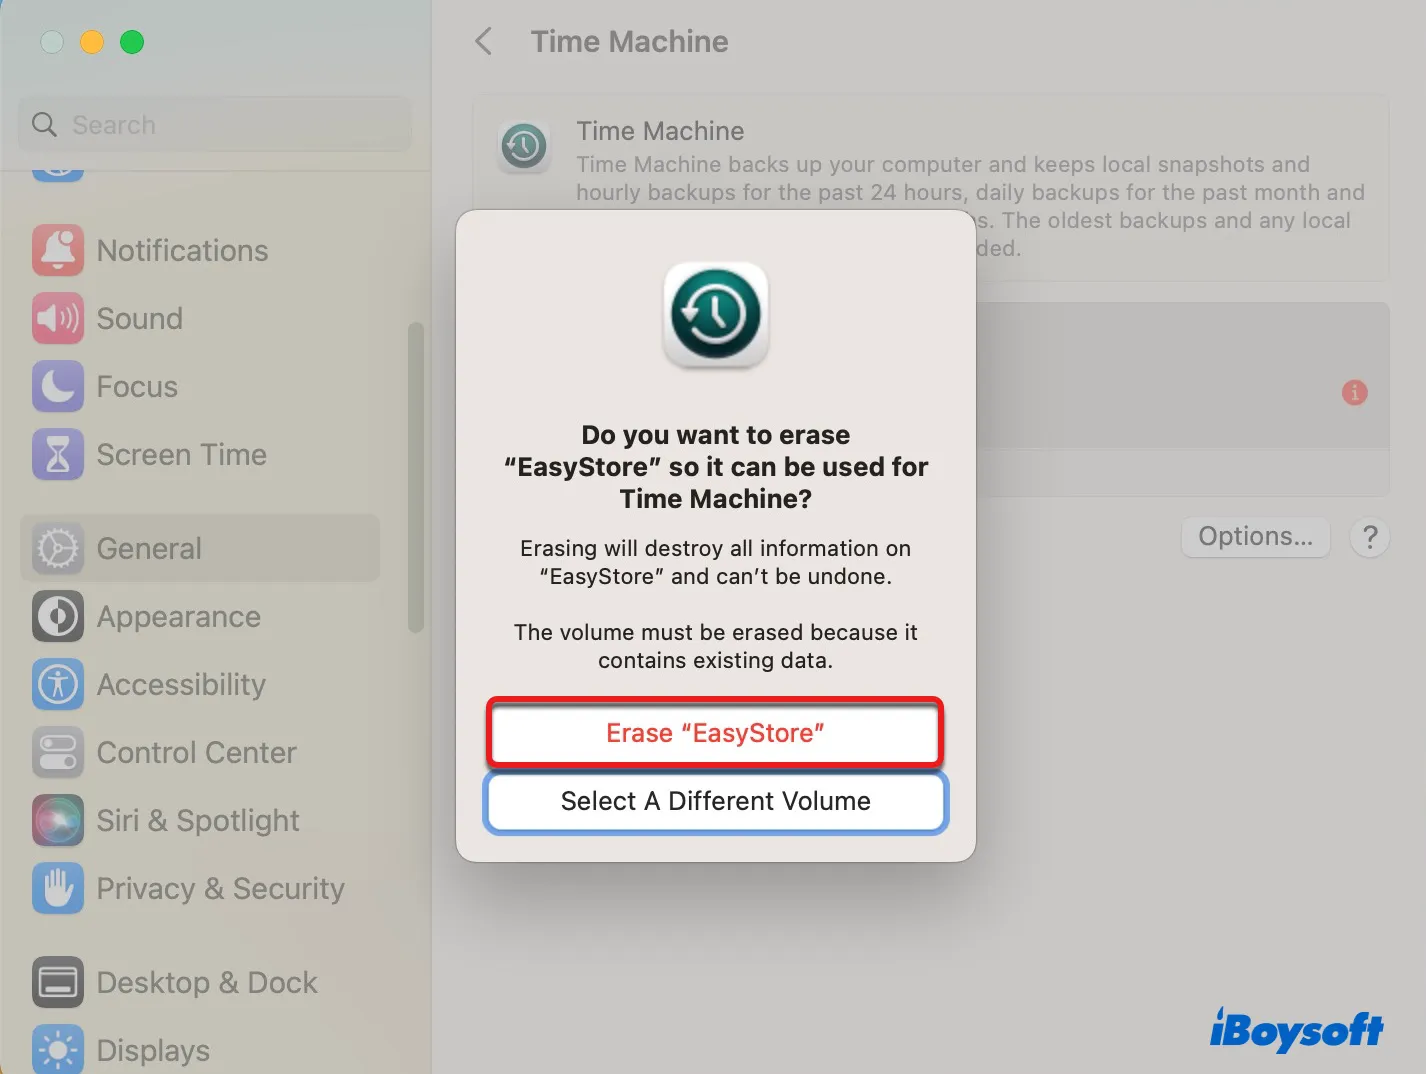 Agree to erase your easystore external hard drive for Time Machine